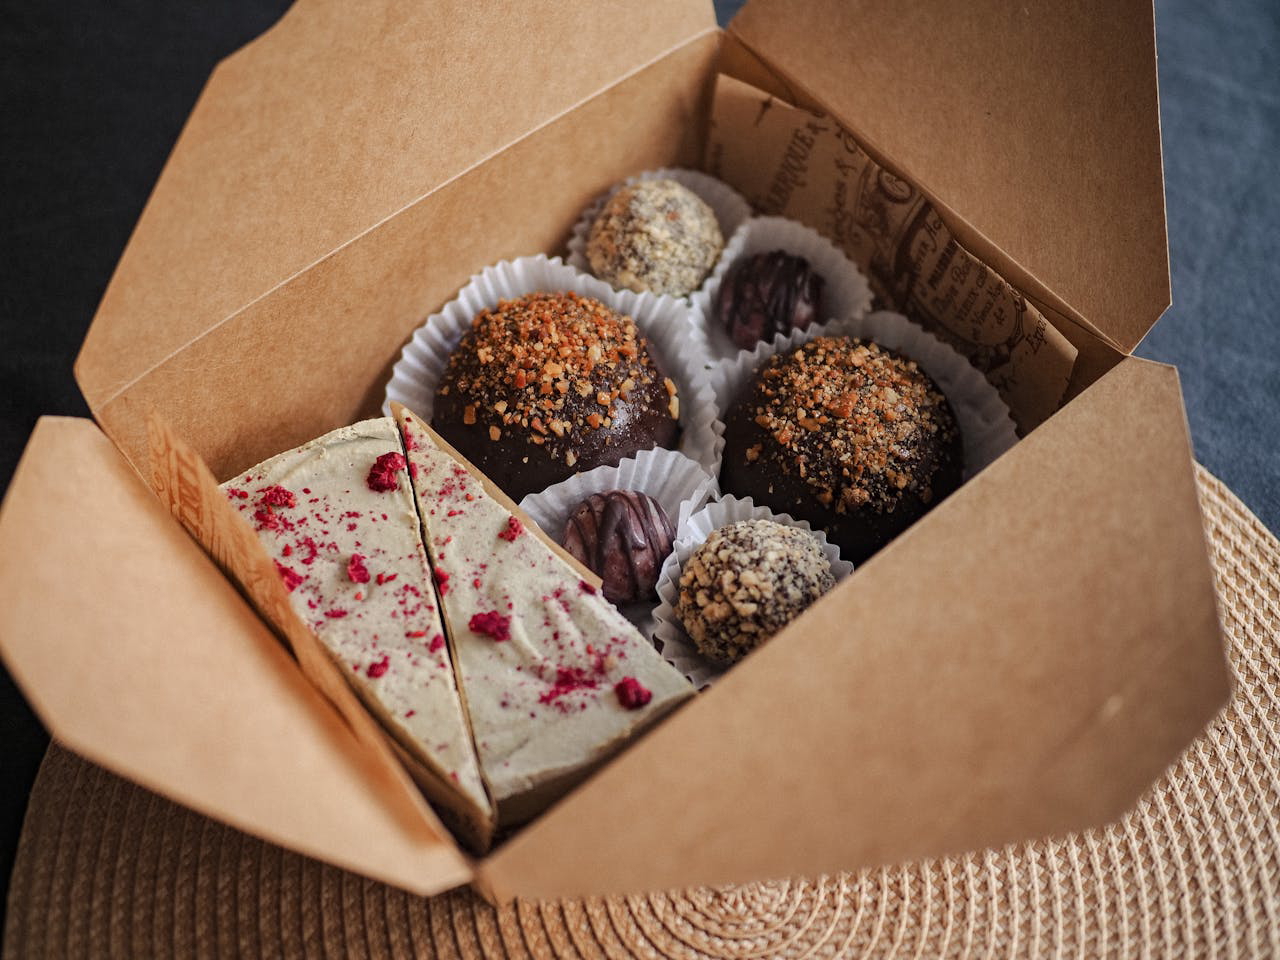 Chocolate Truffles and Cake Slices Packed in Cardboard Food Box